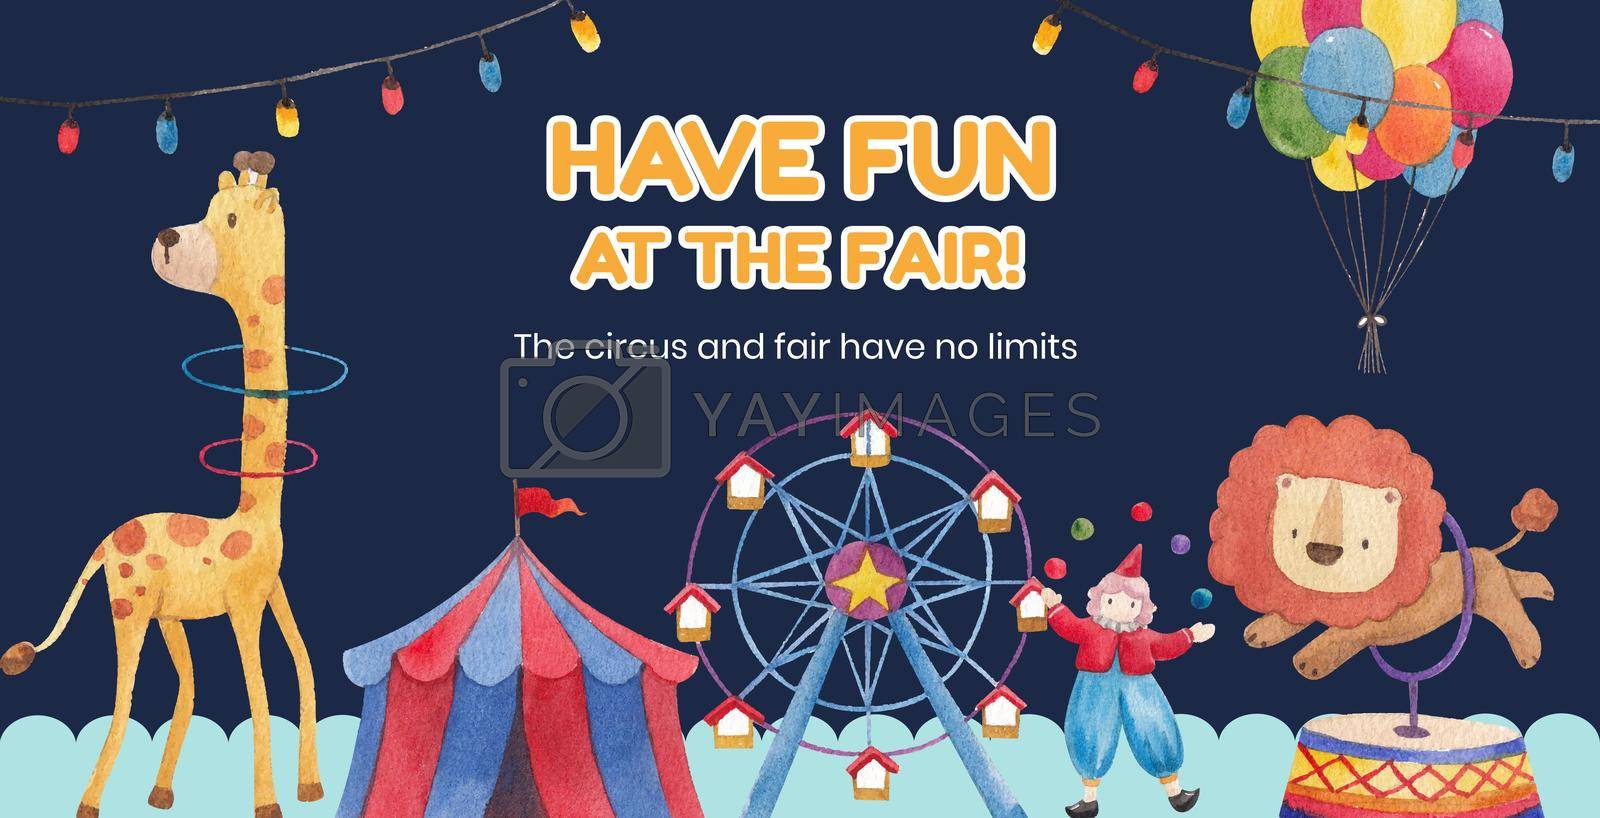 Royalty free image of Billboard template with circus funfair concept,watercolor style by Photographeeasia